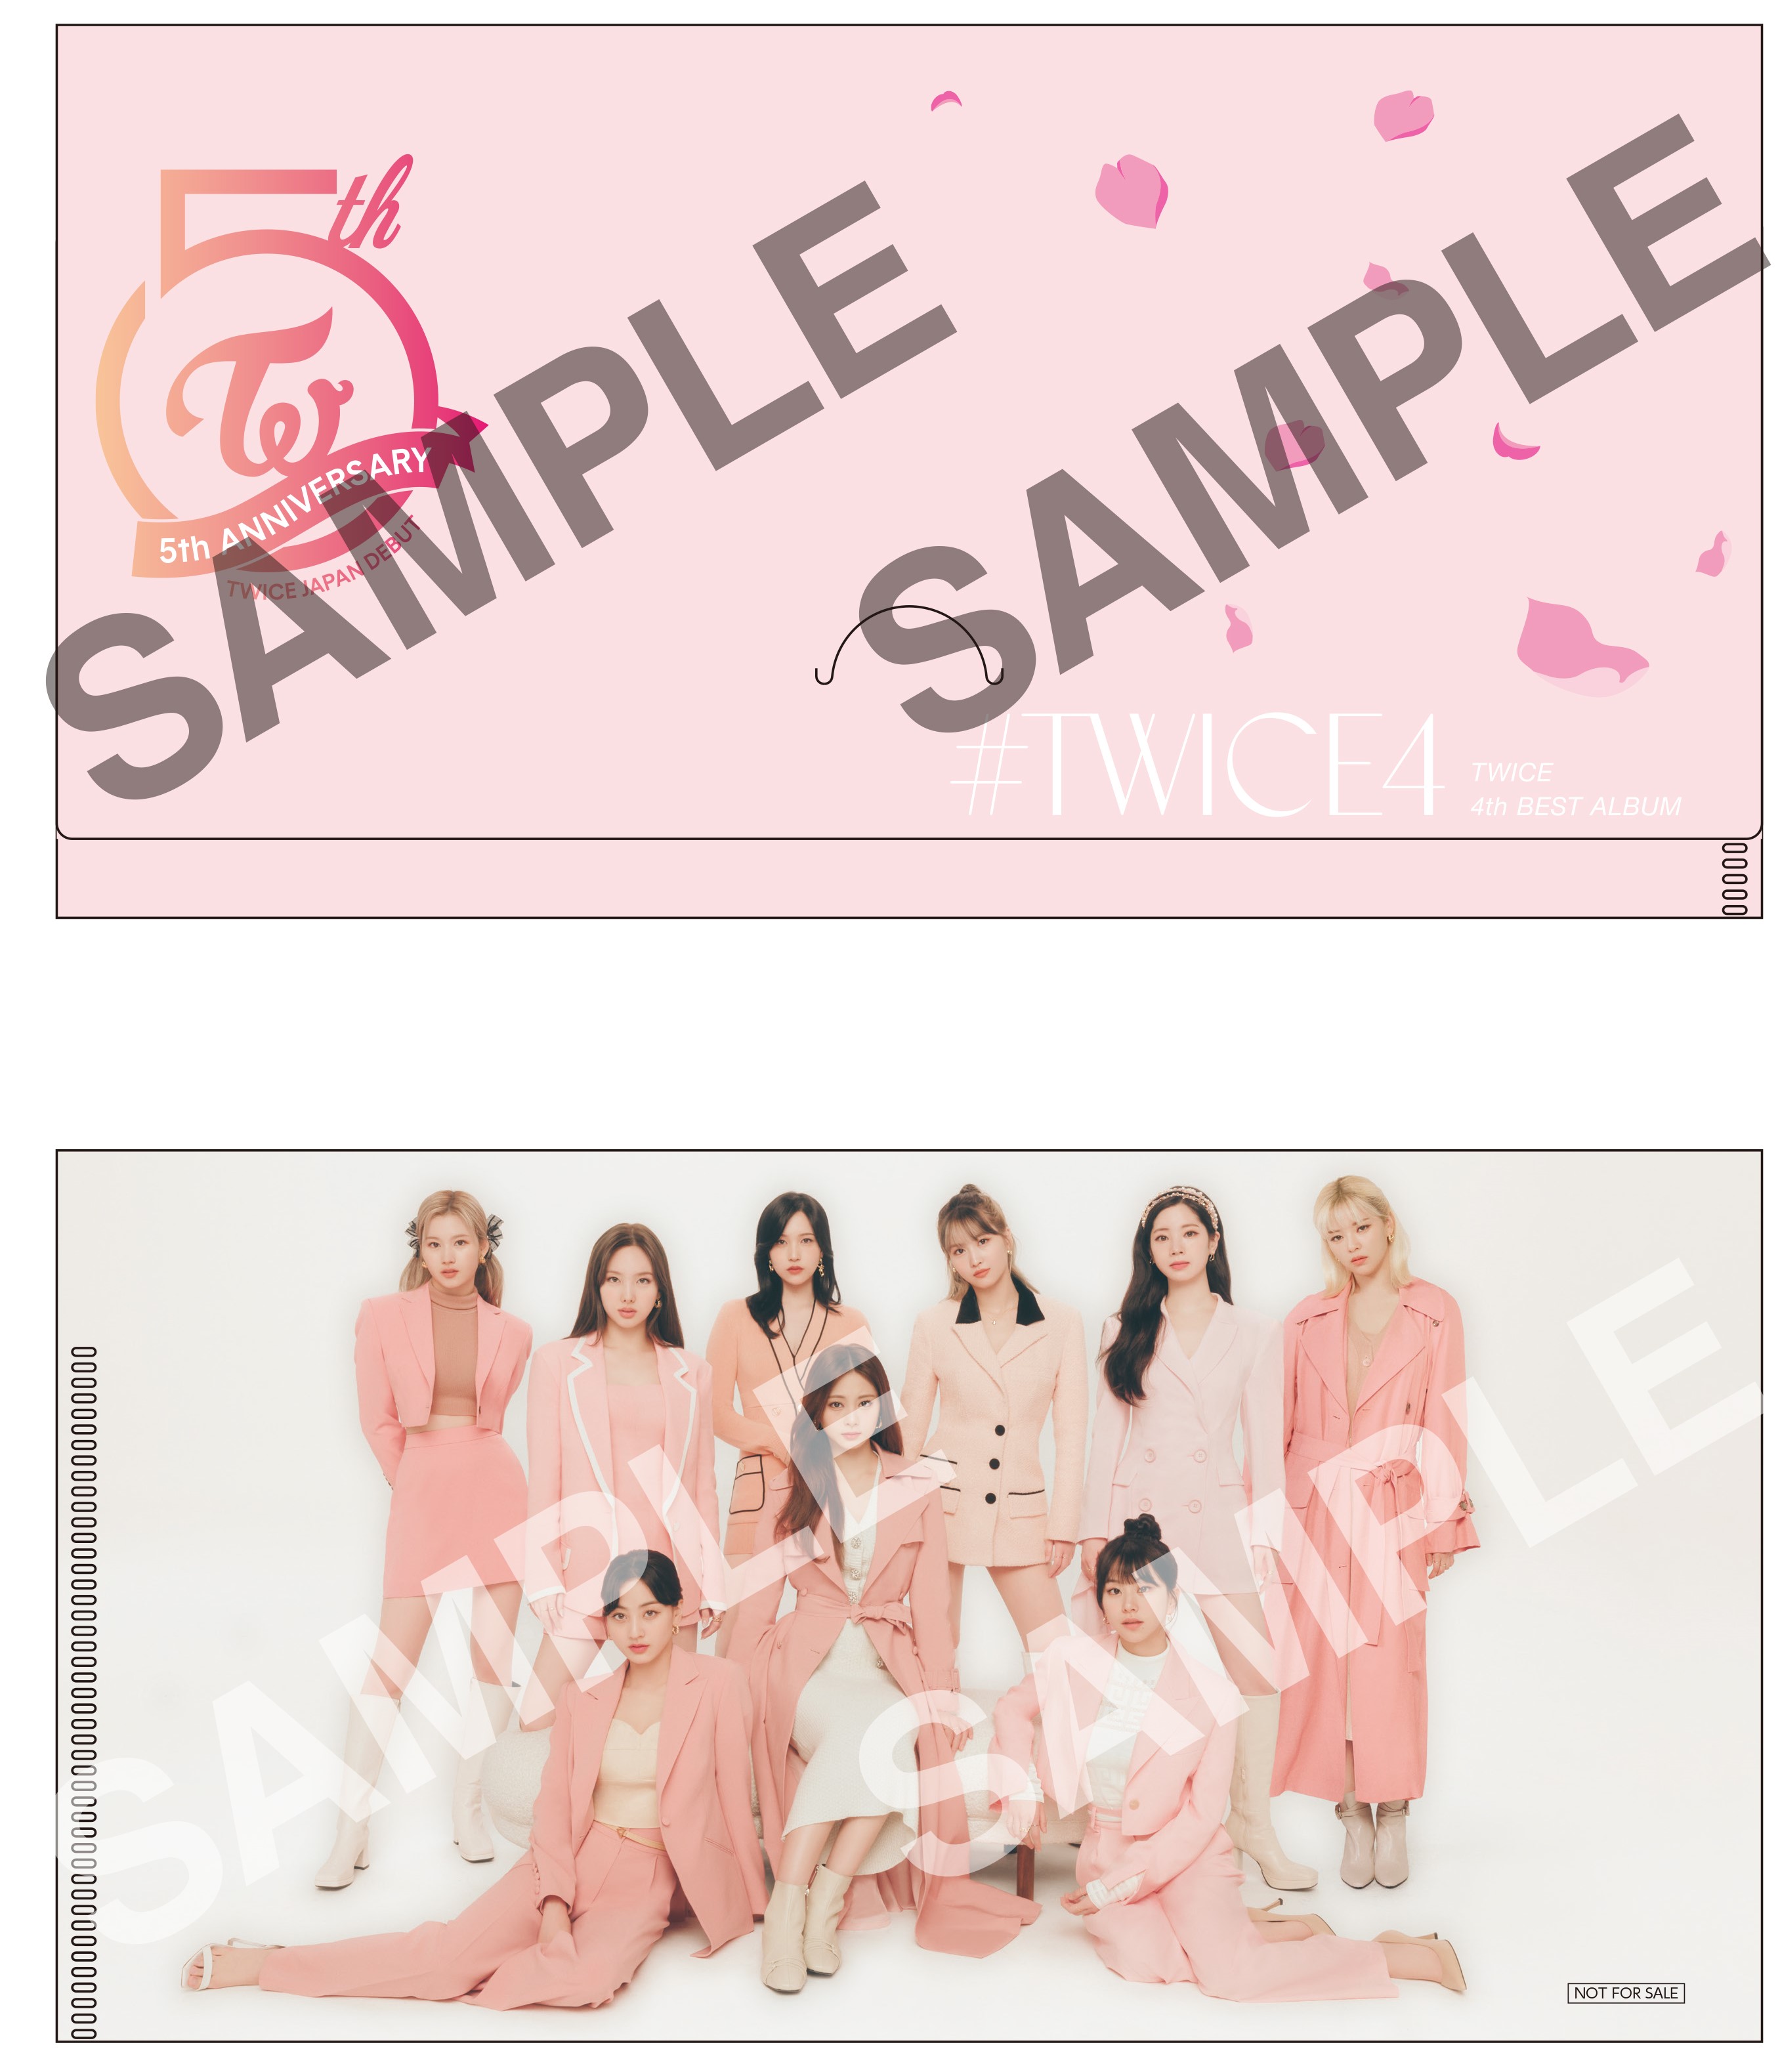 TWICE OFFICIAL SITE